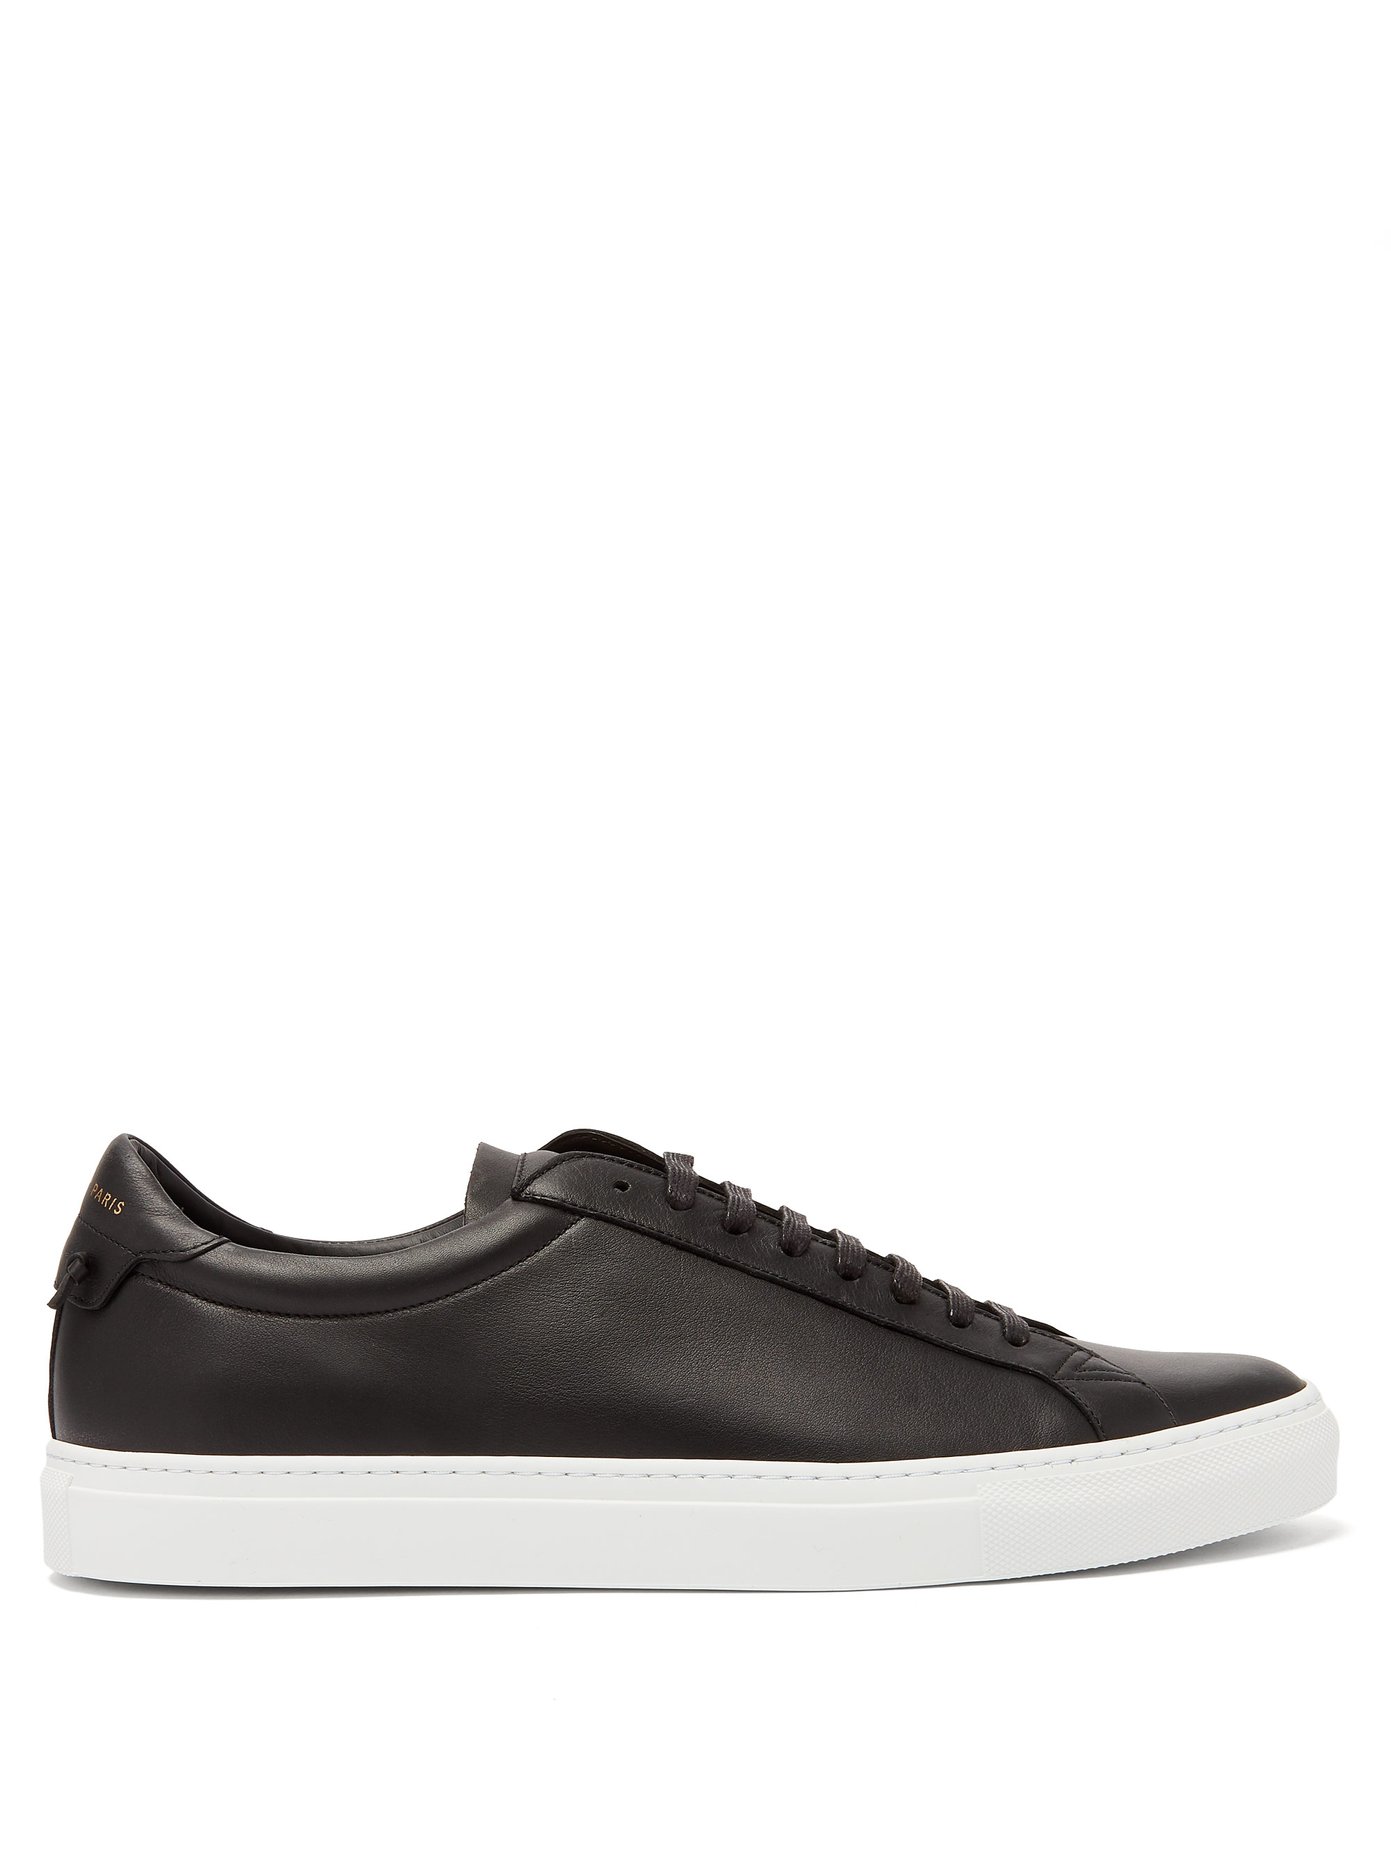 givenchy women's urban street leather sneakers